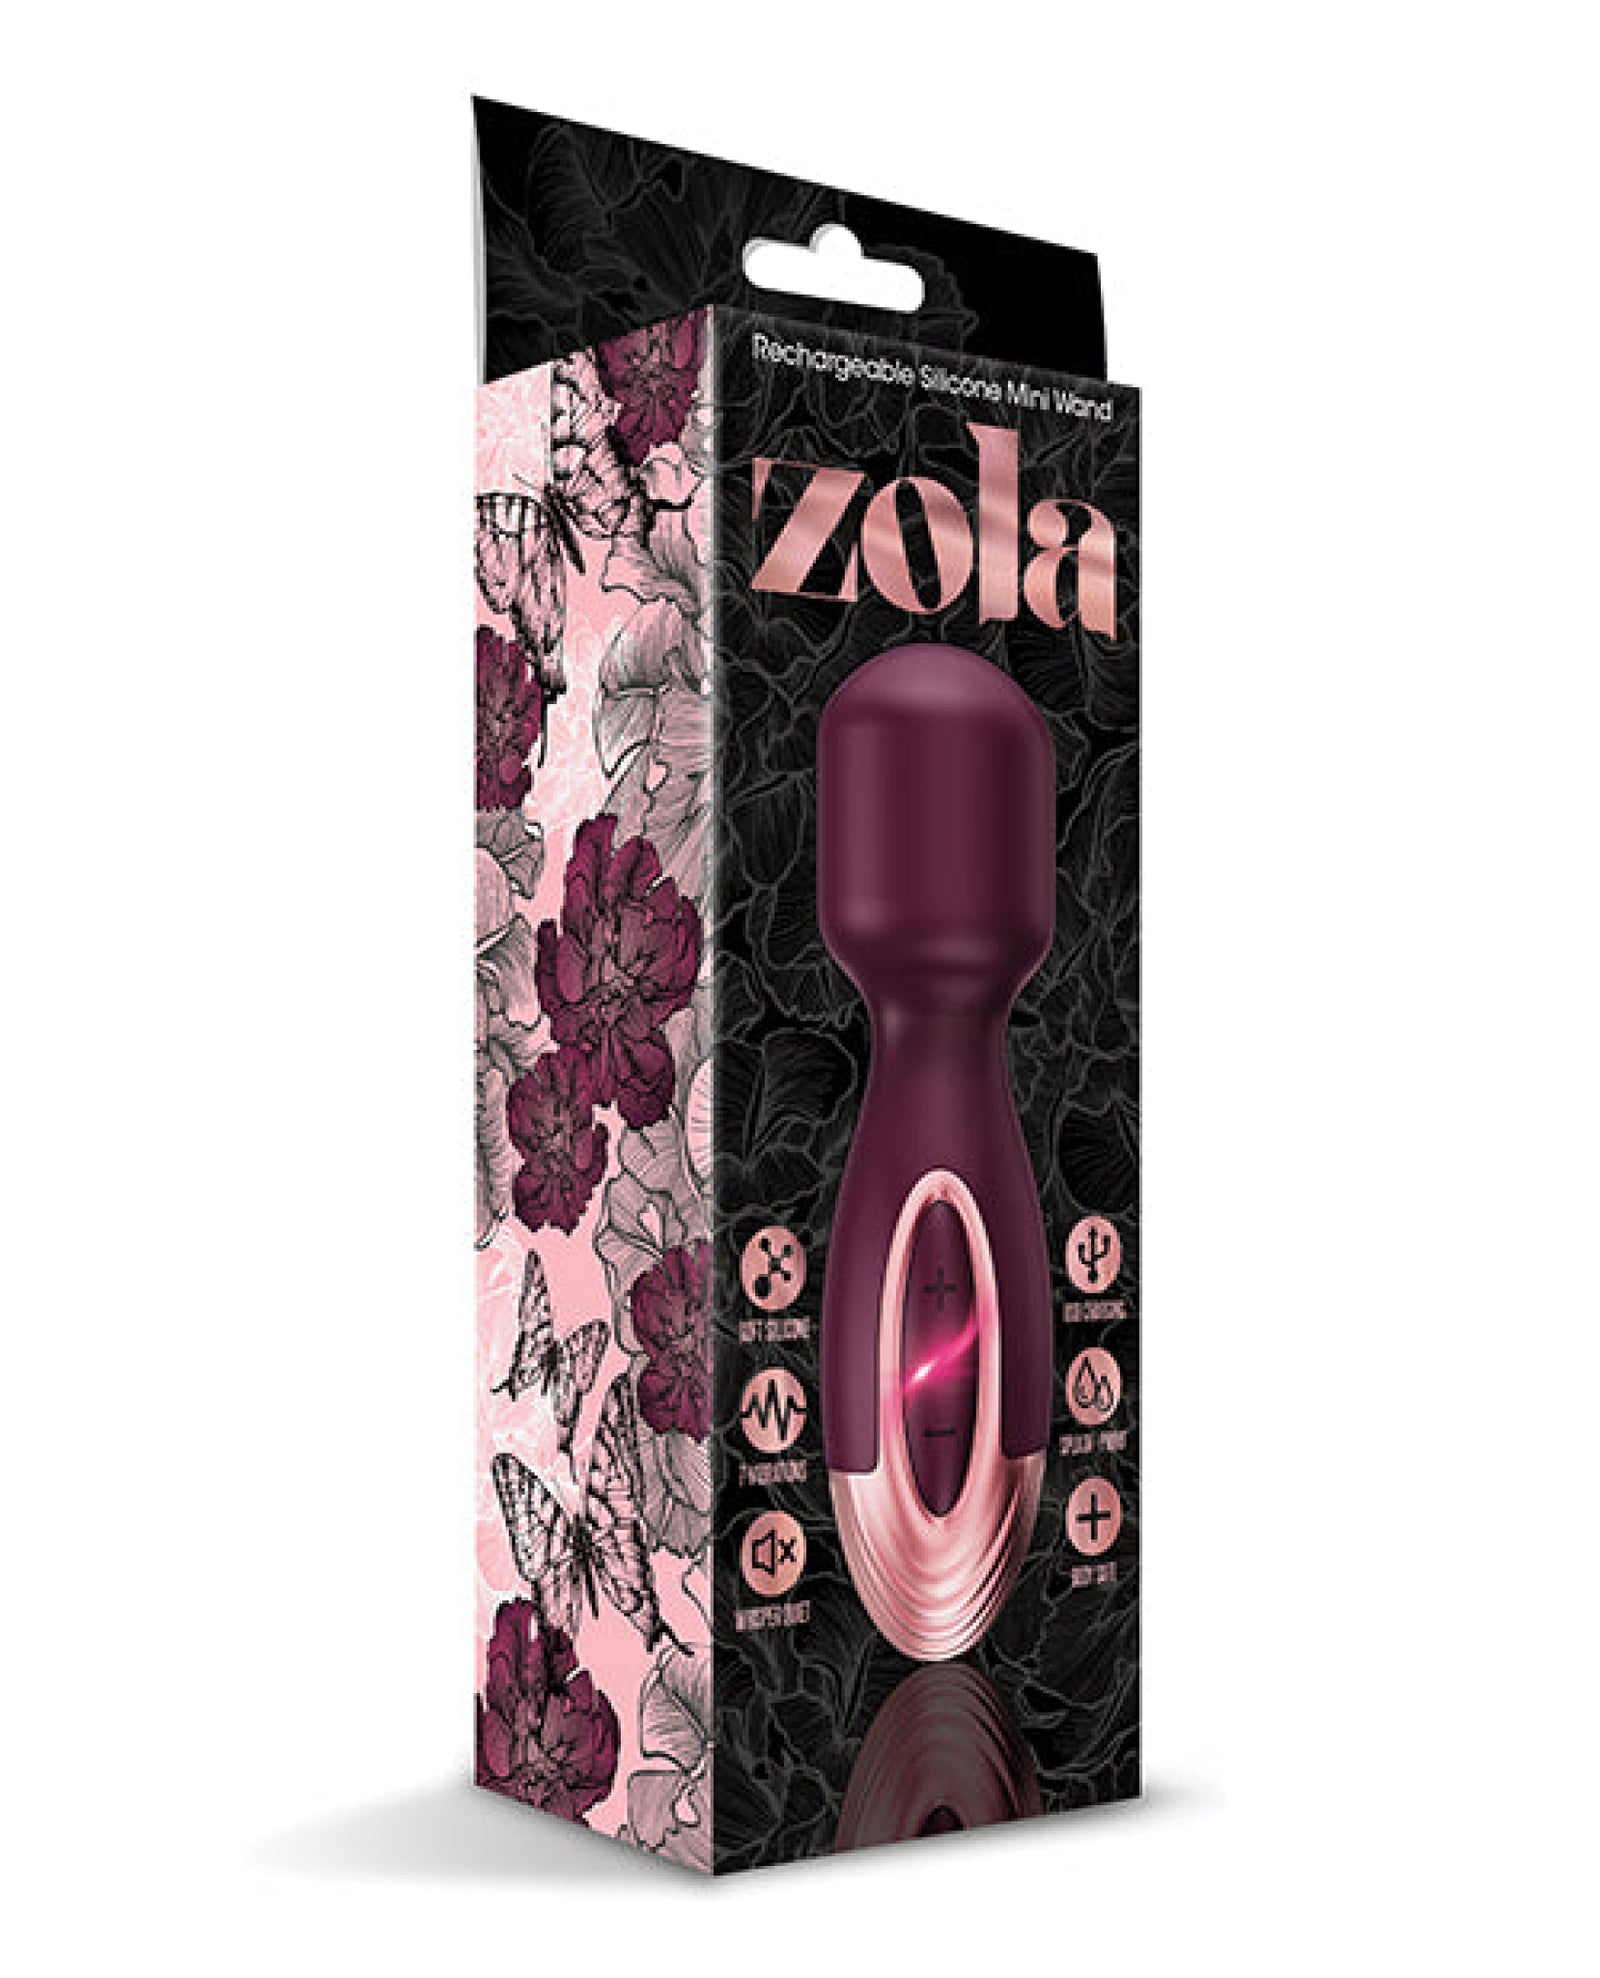 Zola Rechargeable Silicone Mini Wand - Burgundy-rose Gold Zola